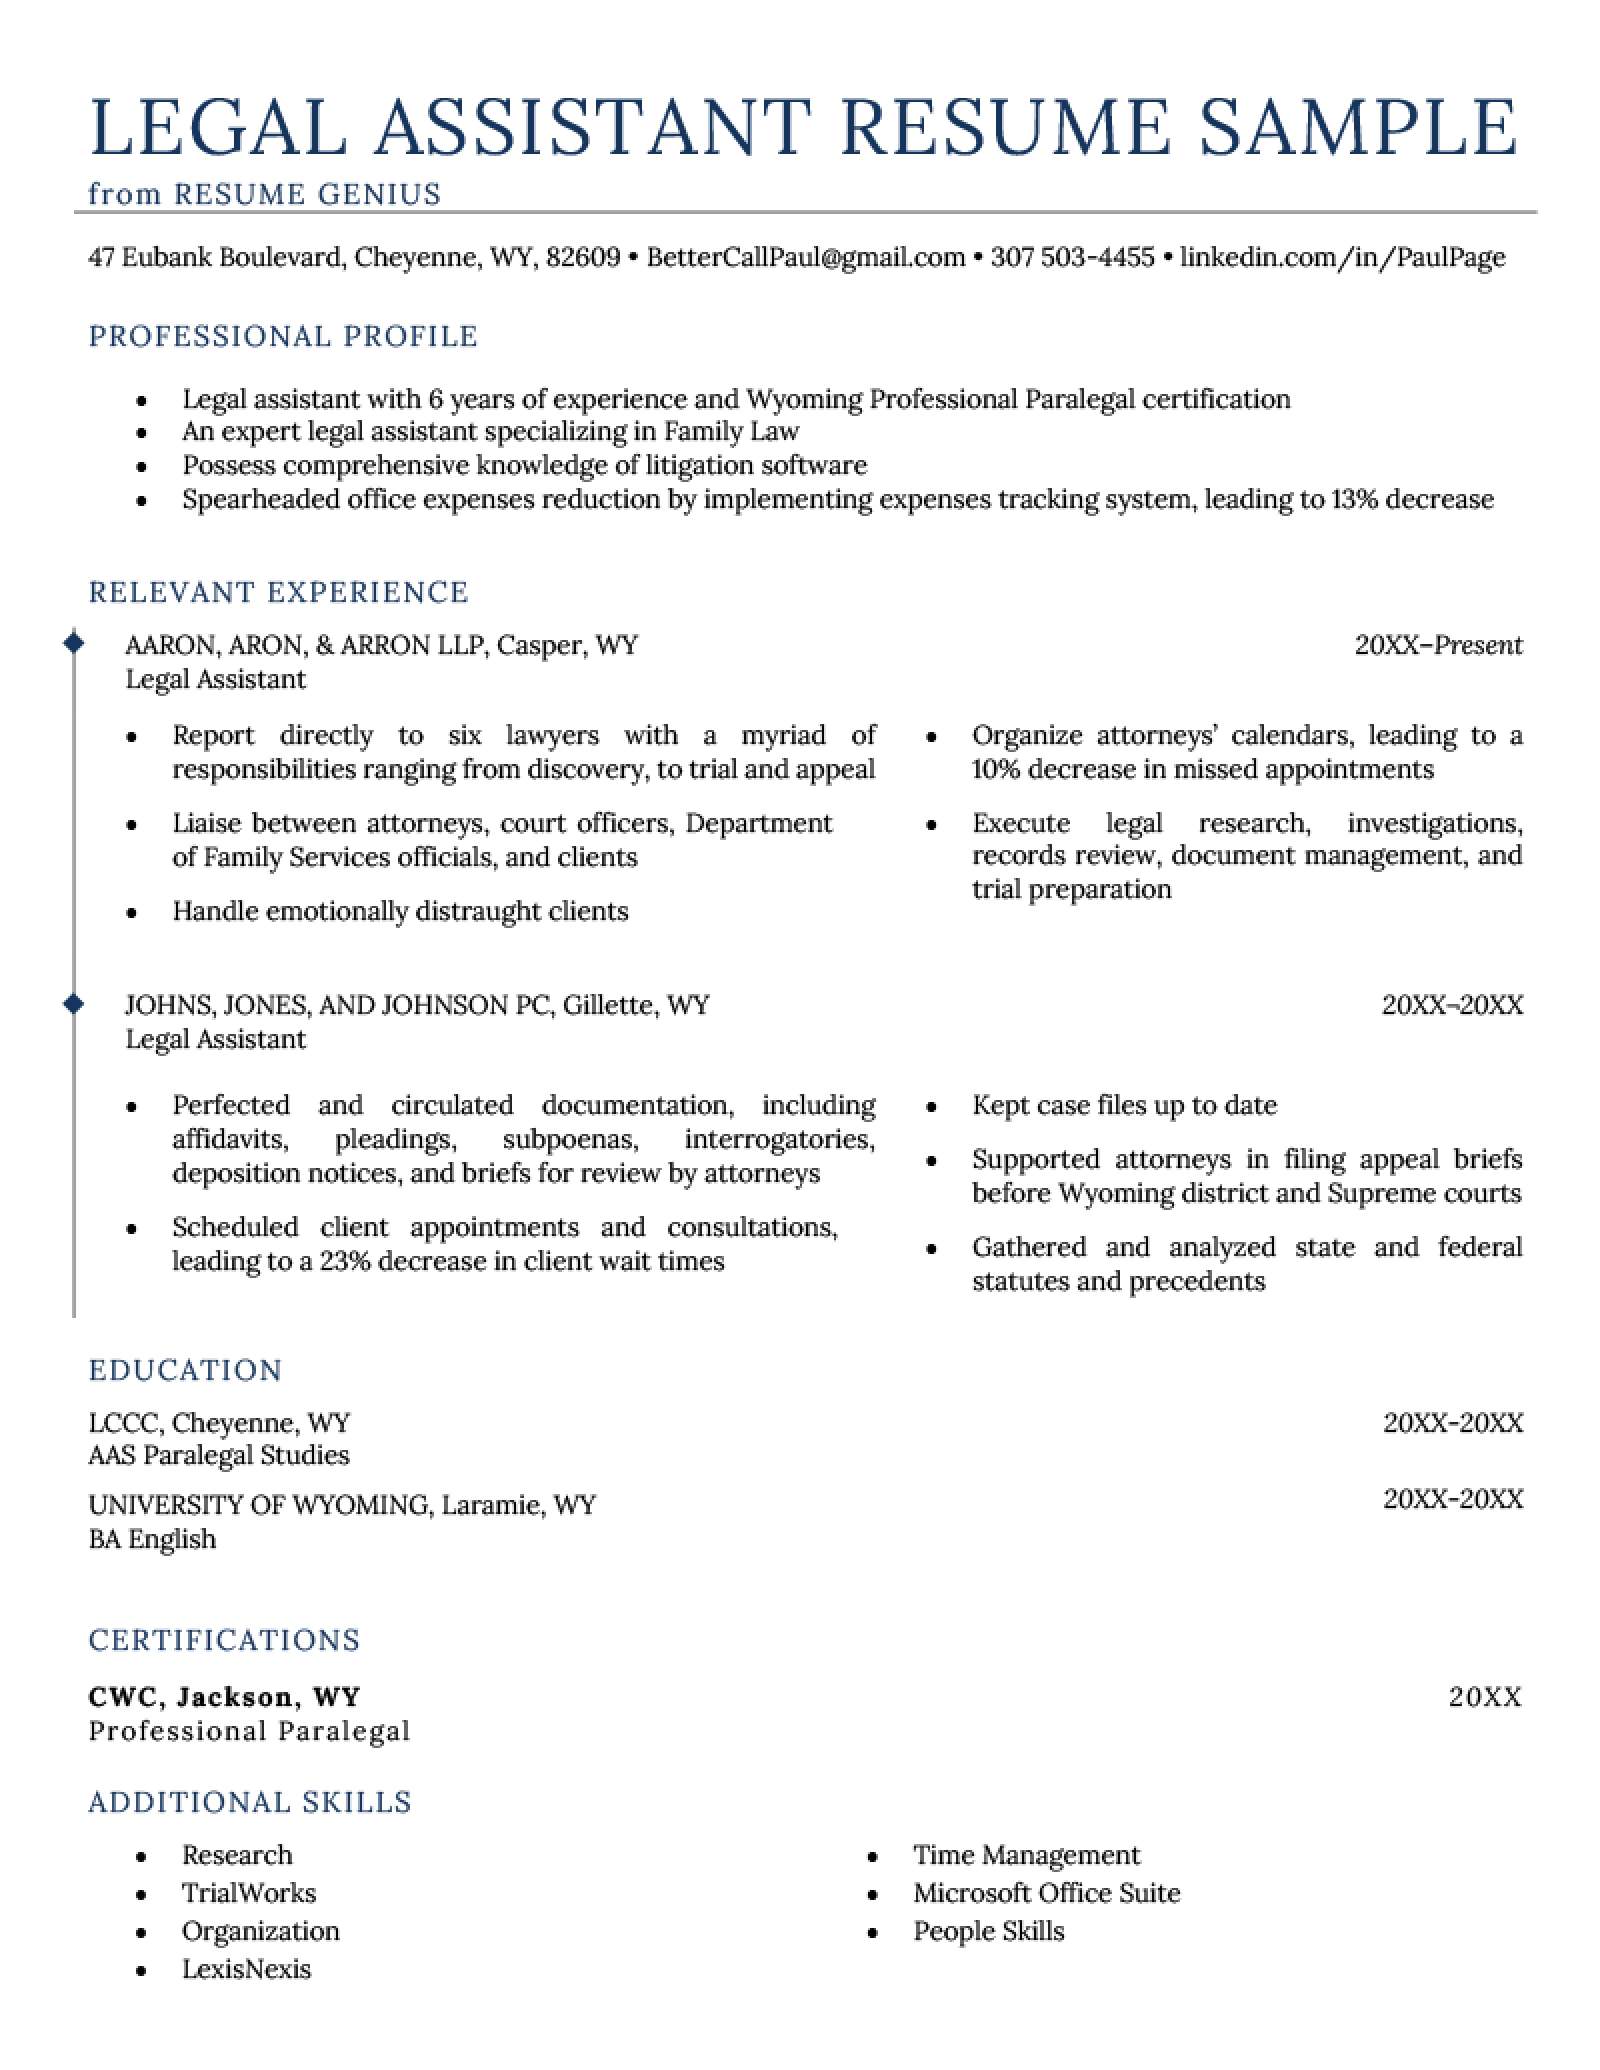 A legal assistant resume example with sections for the applicant's resume summary, work experience, education, and additional skills